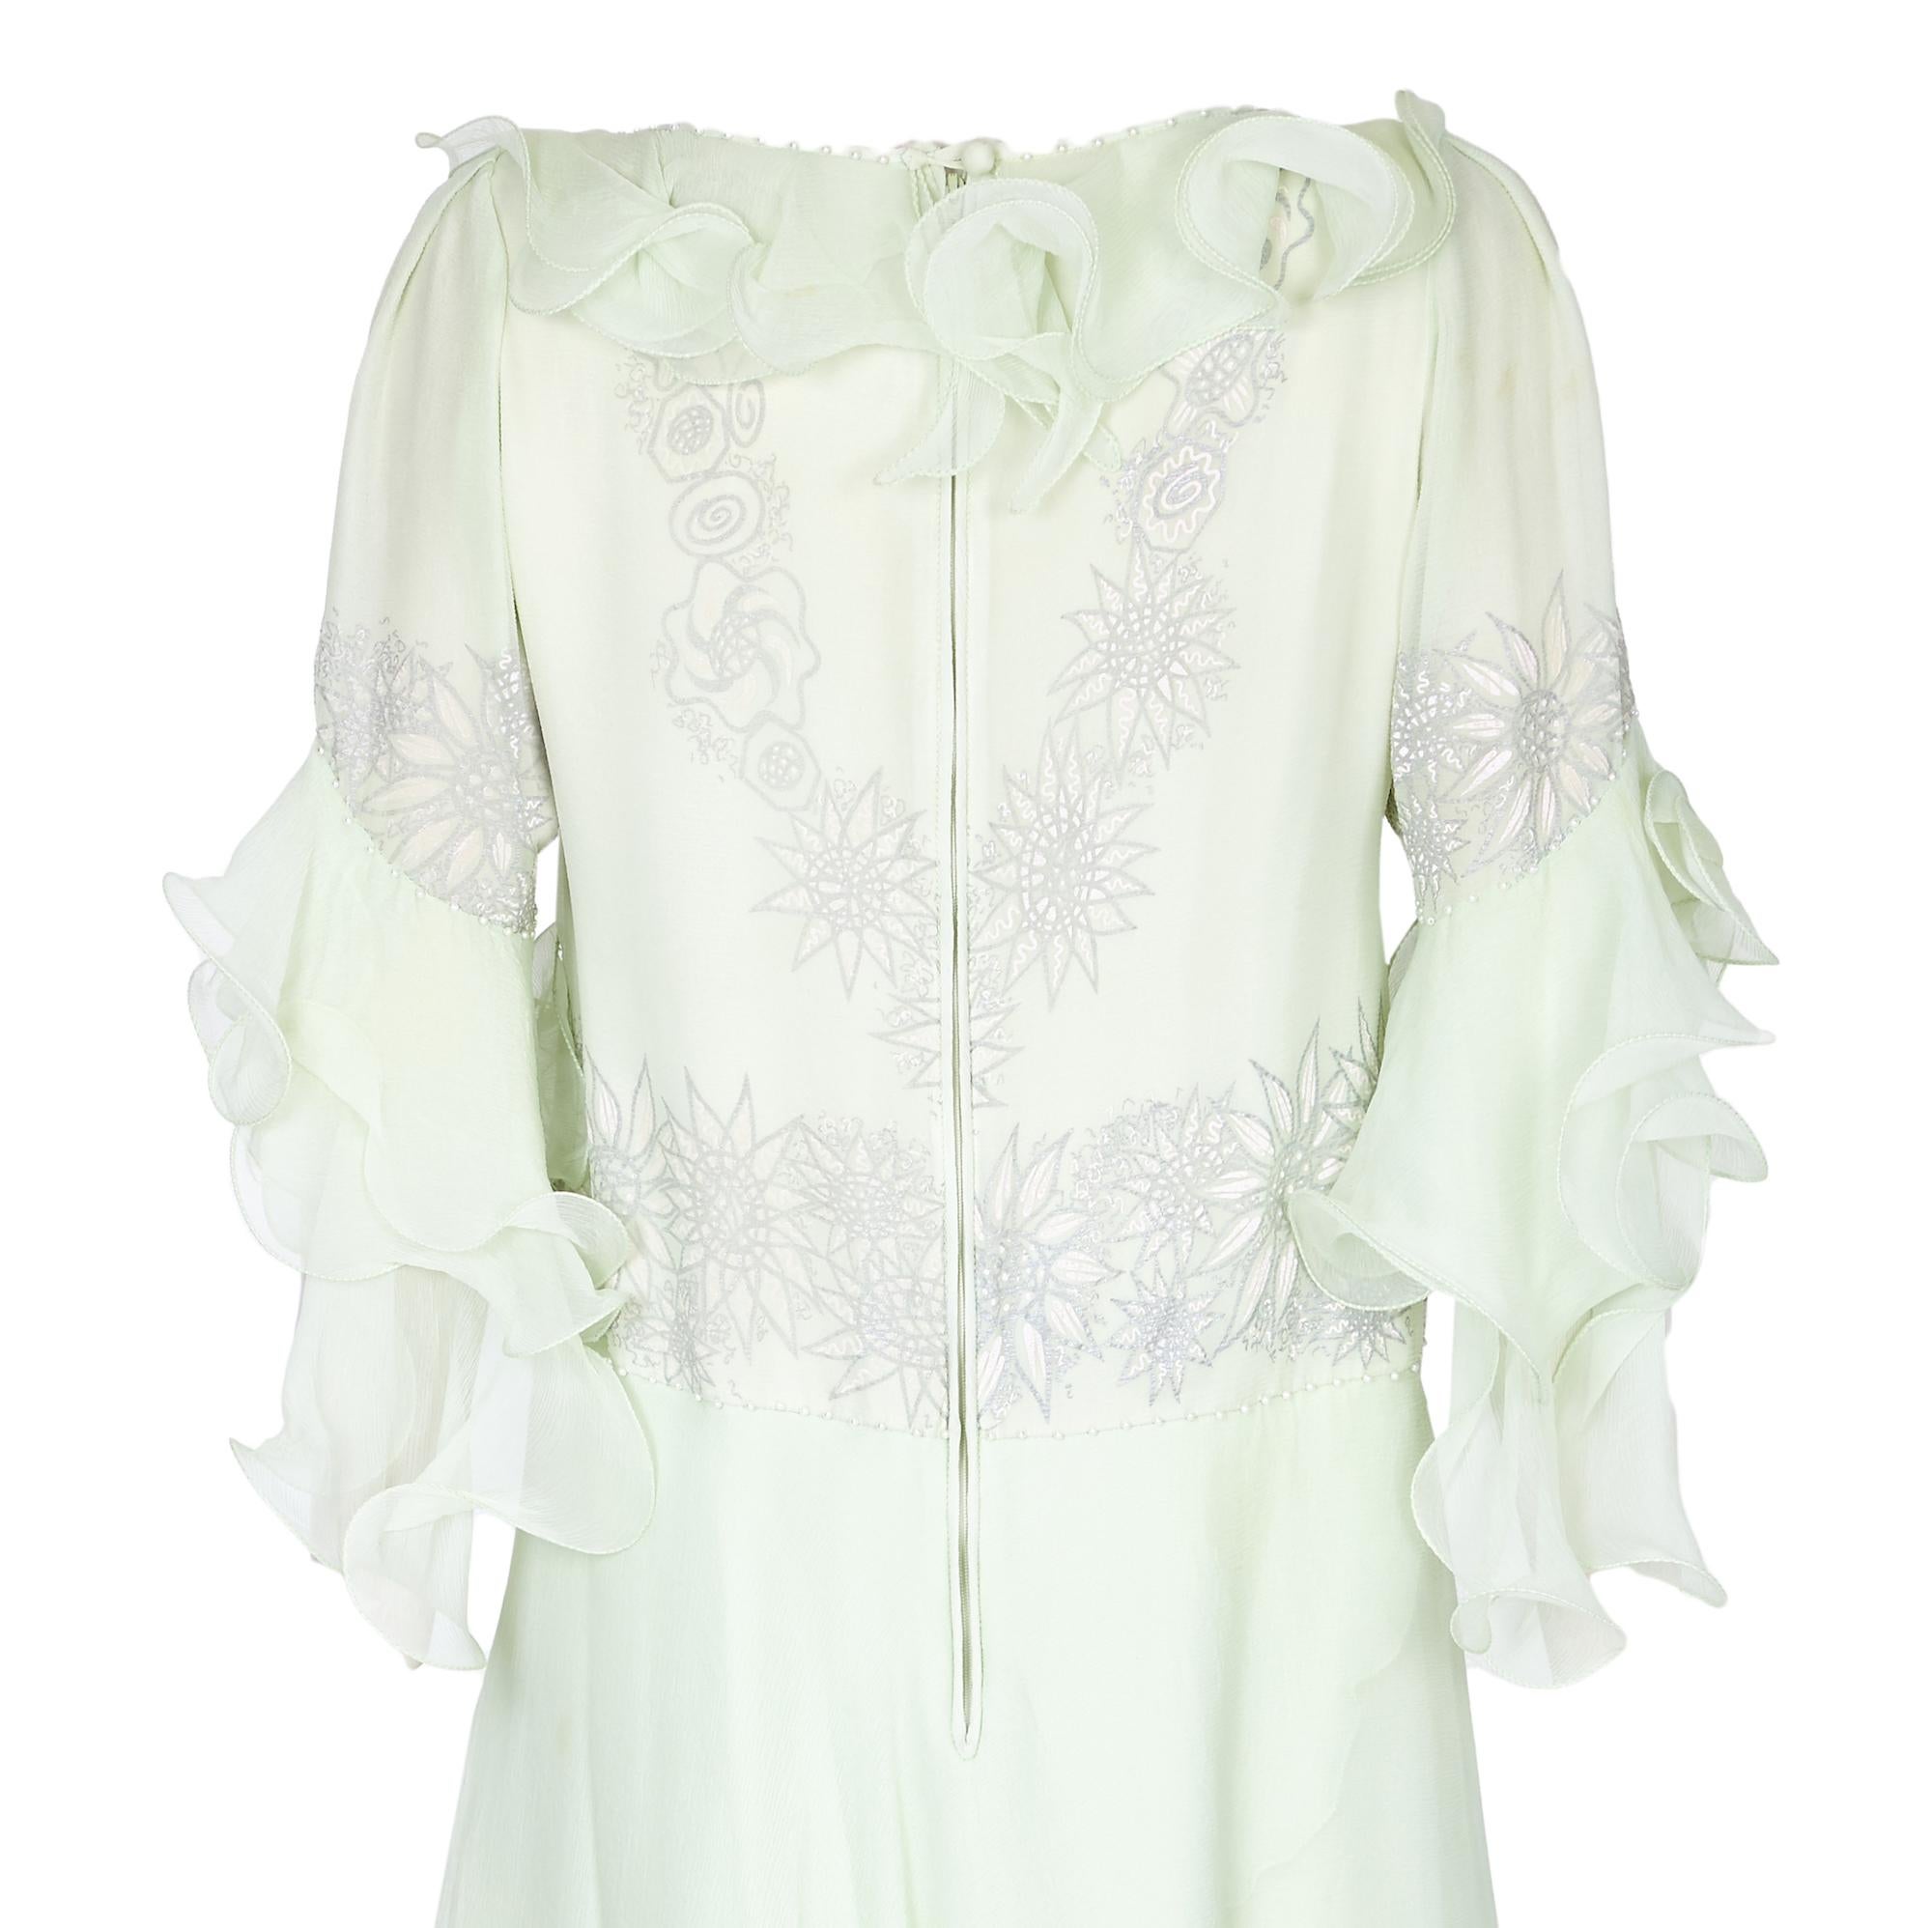 1980s Zandra Rhodes Pale Green Couture Silk Chiffon Dress In Excellent Condition For Sale In London, GB